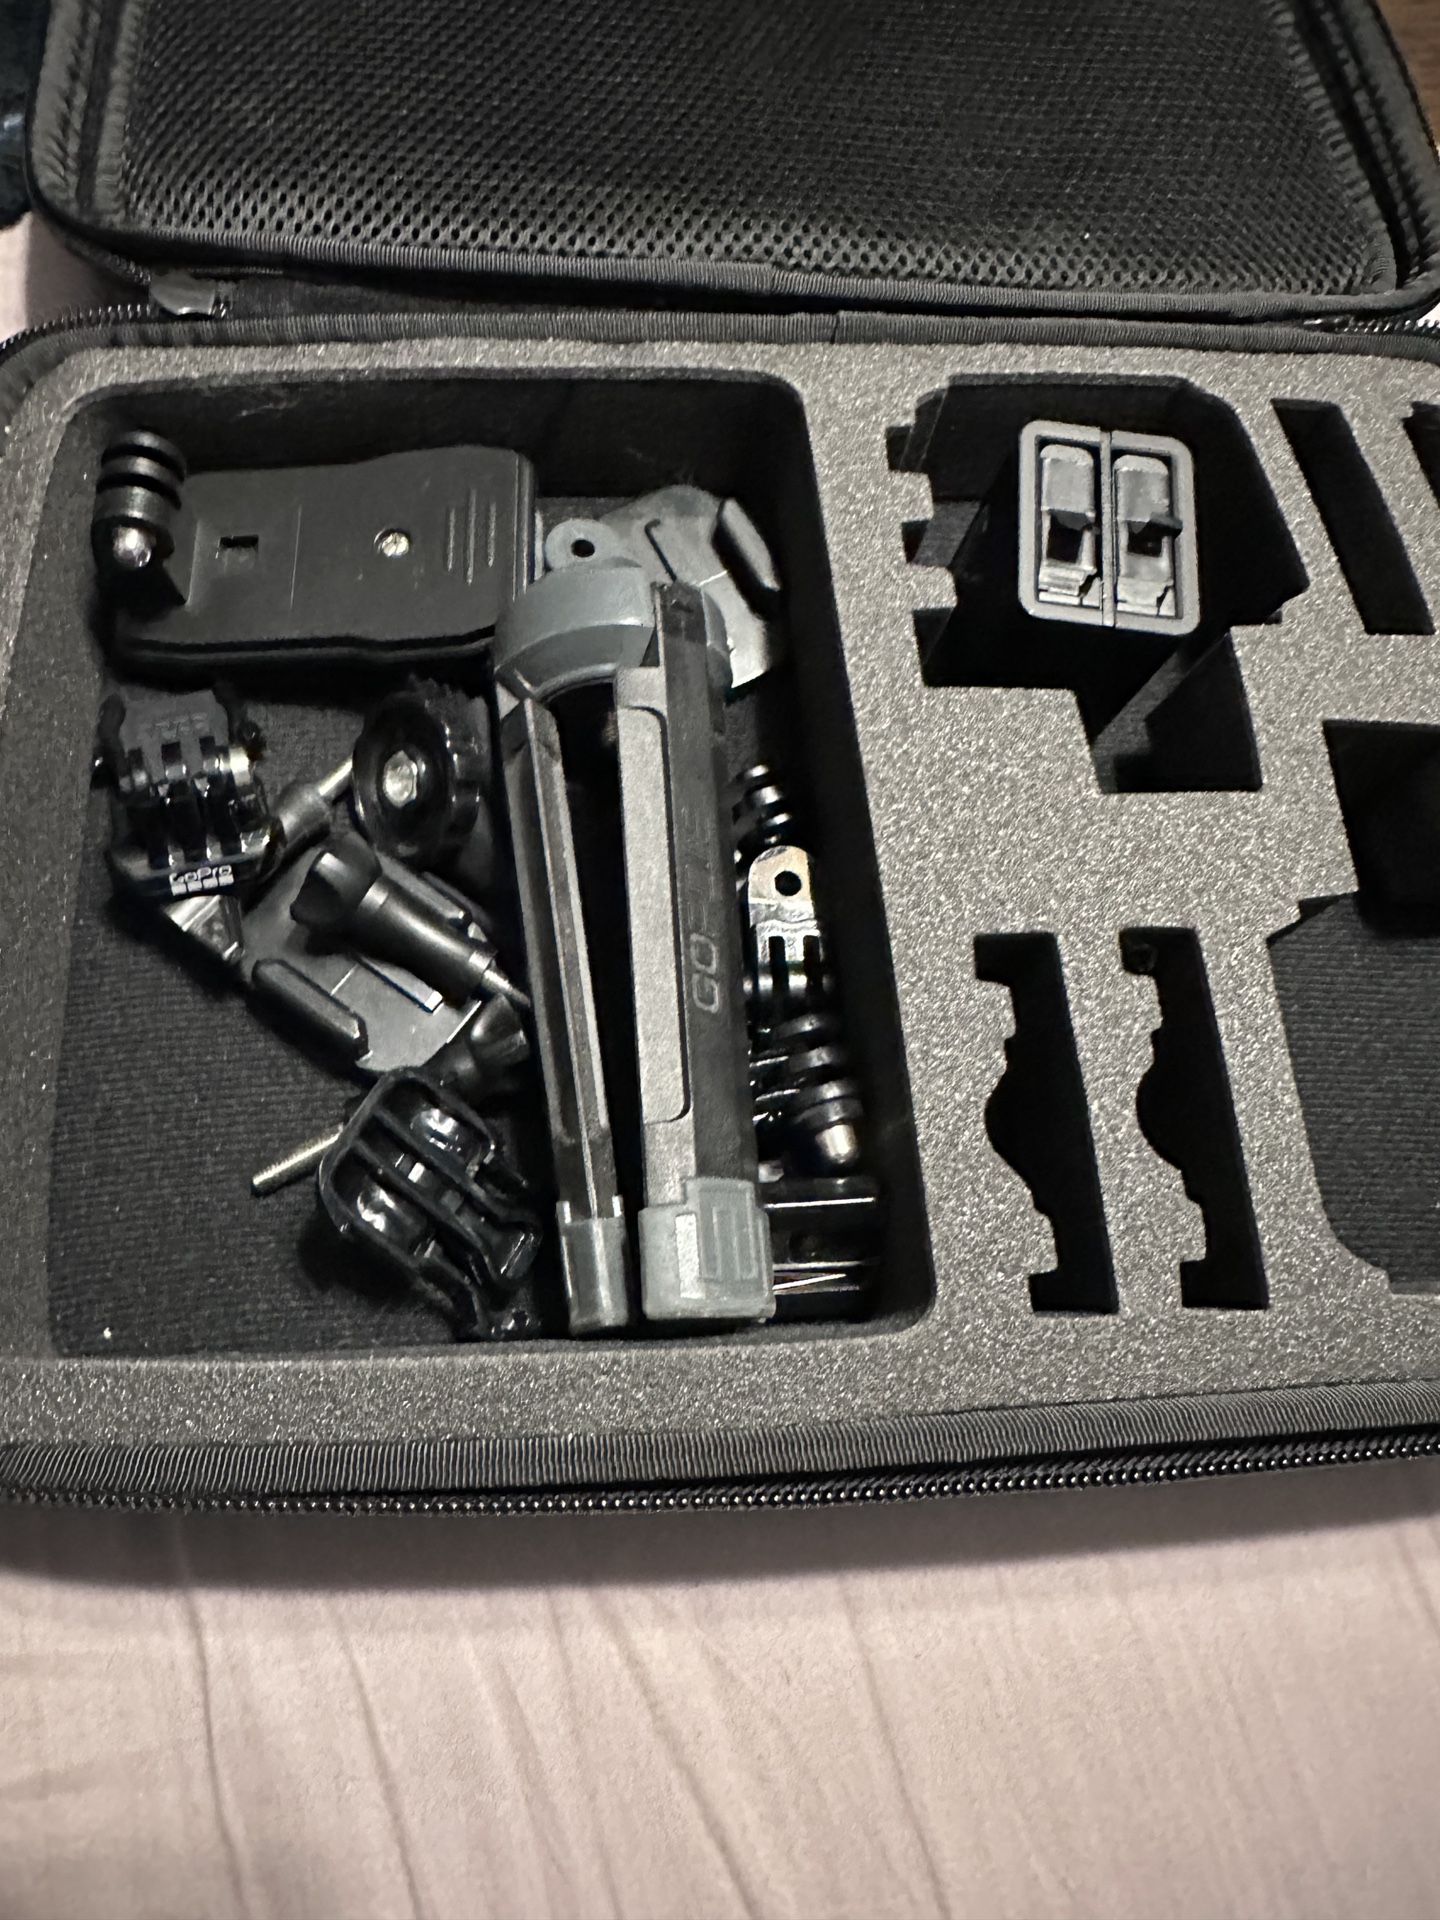 GoPro Attachments and Case